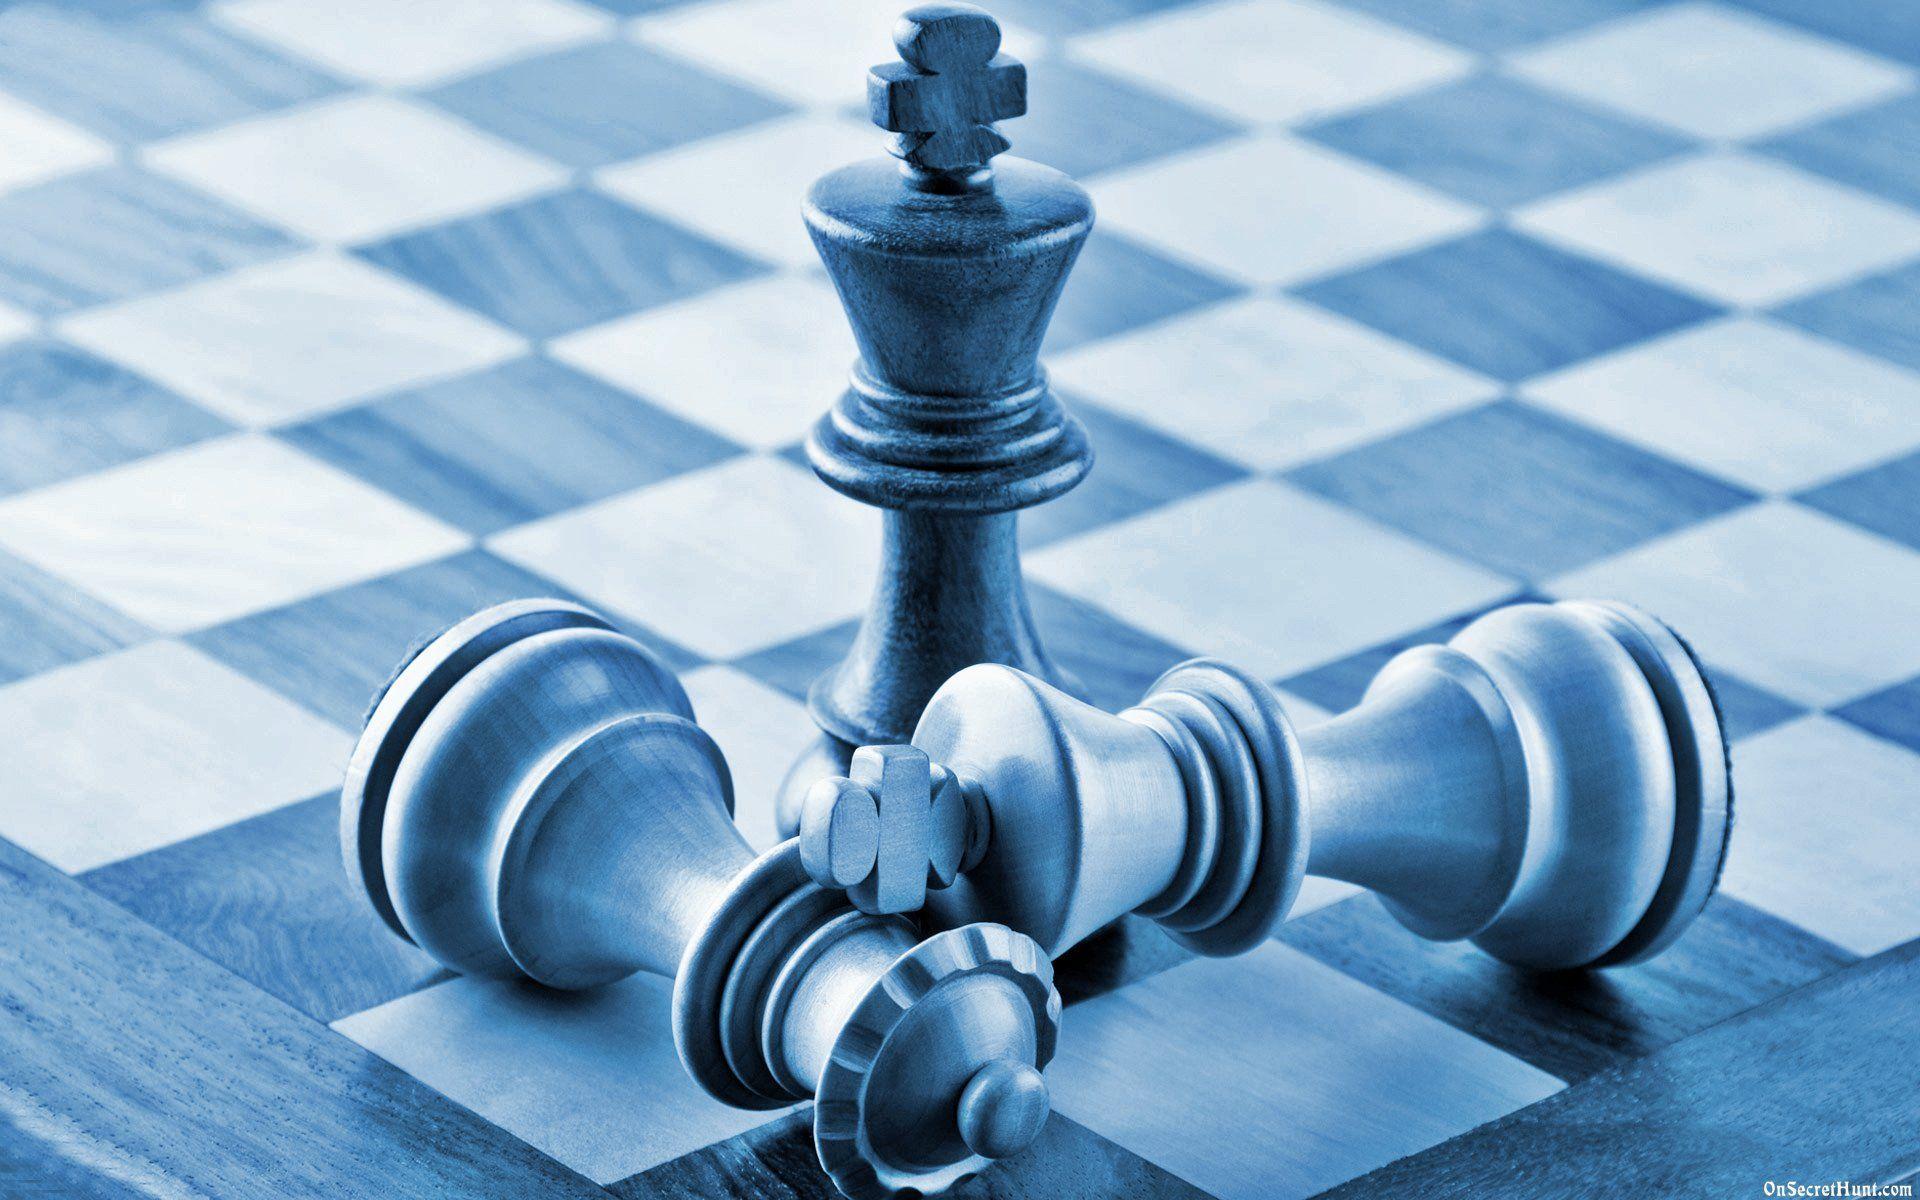 Chess King Photos, Download The BEST Free Chess King Stock Photos